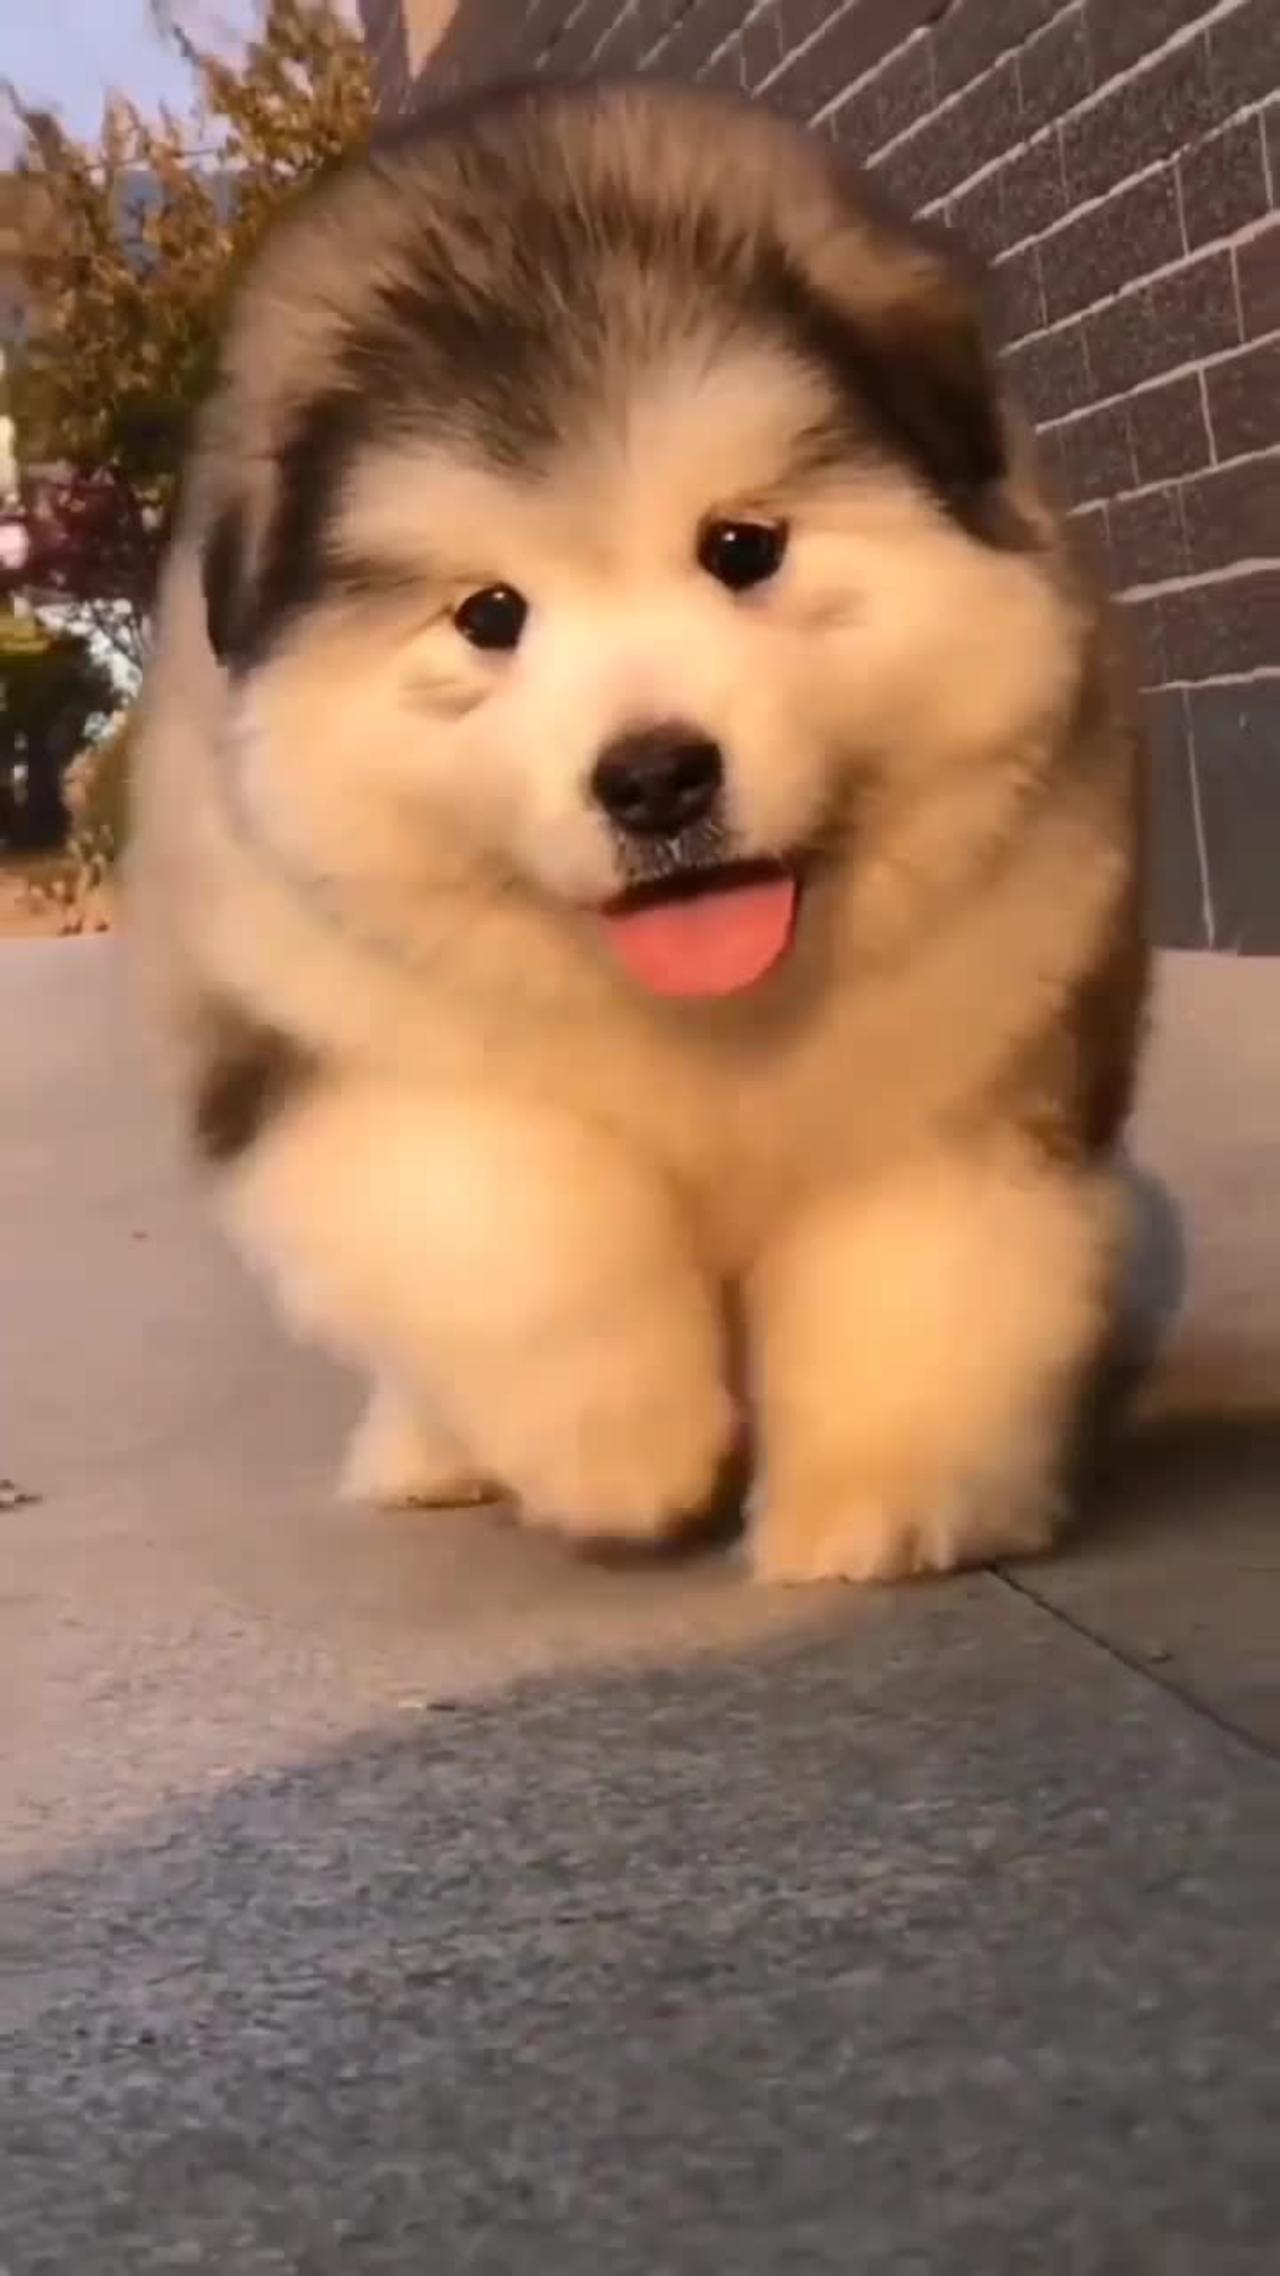 Cute dog videos showing